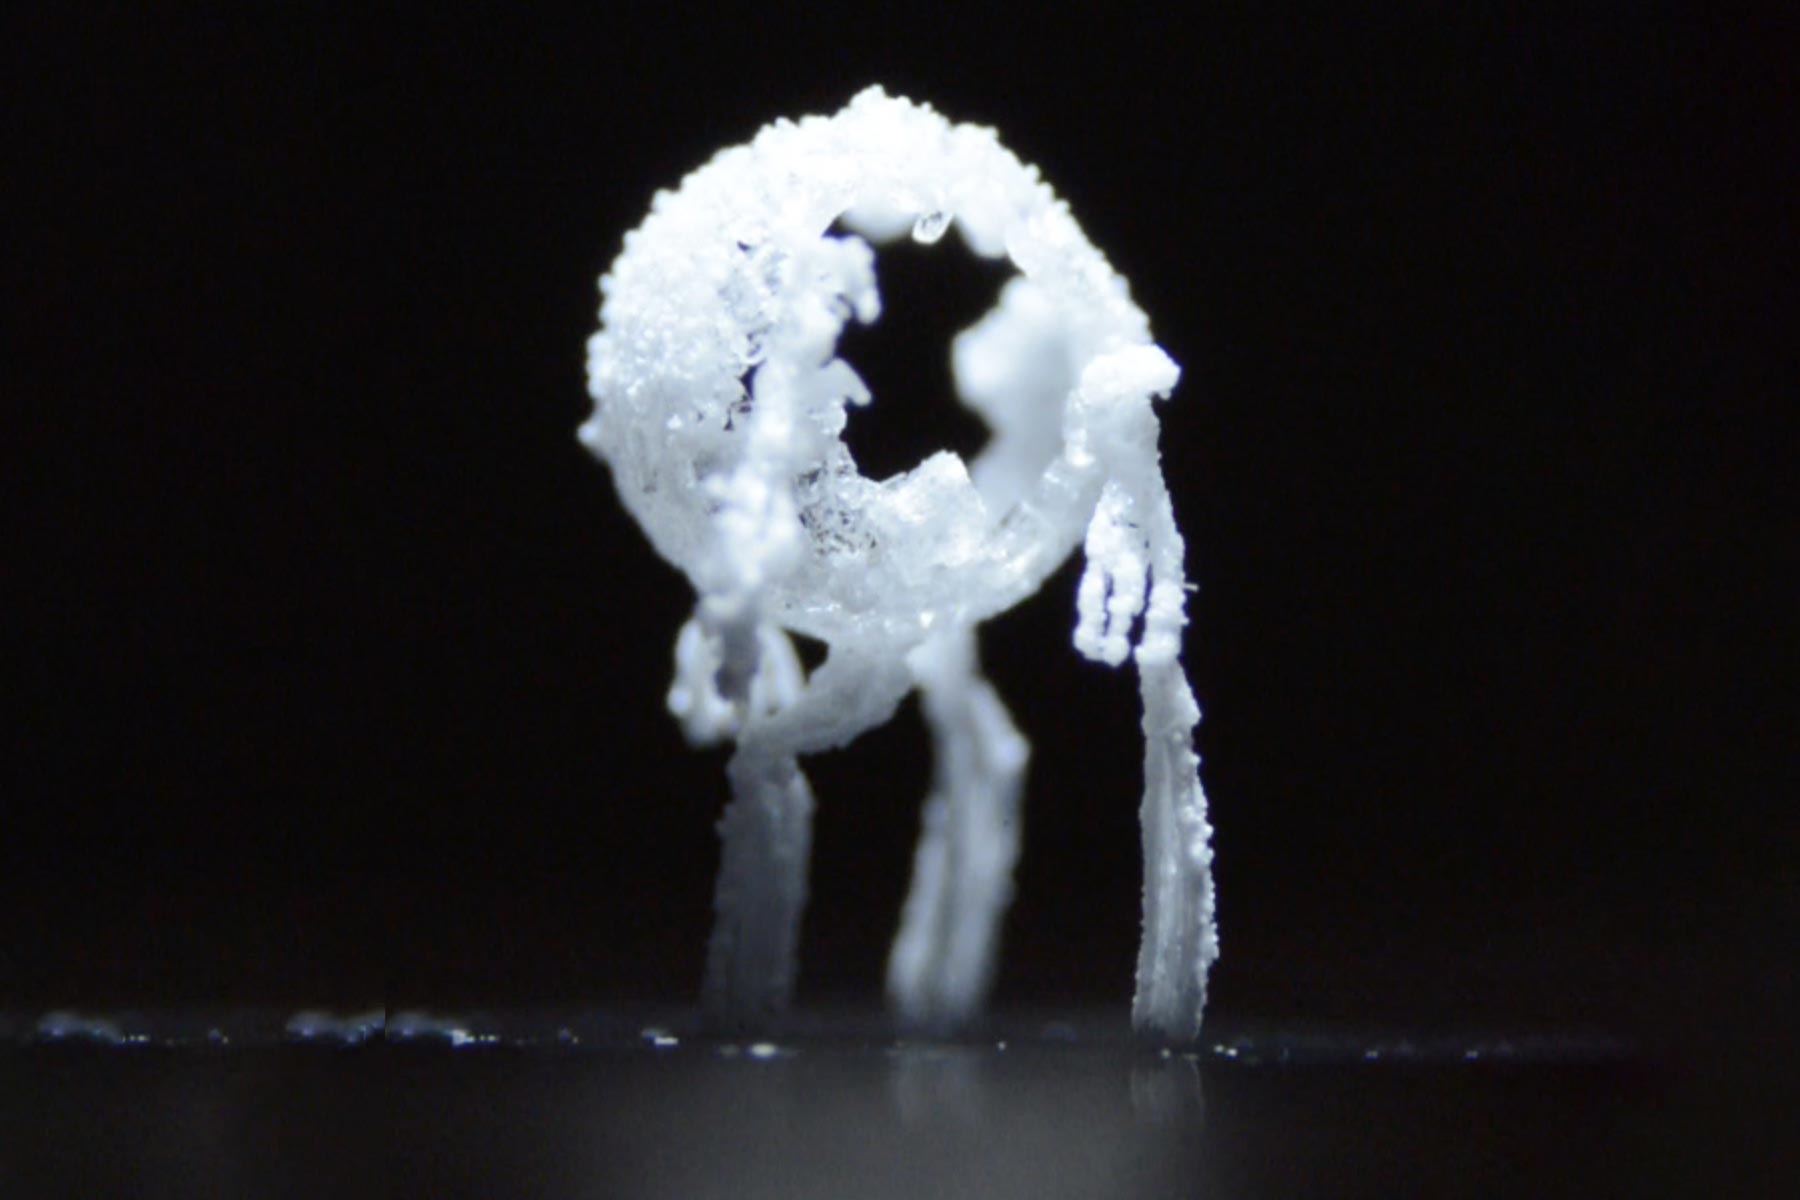 Crystal Critters: Get Salt Out of Water by Making It Grow "Legs" and Self-Eject - SciTechDaily